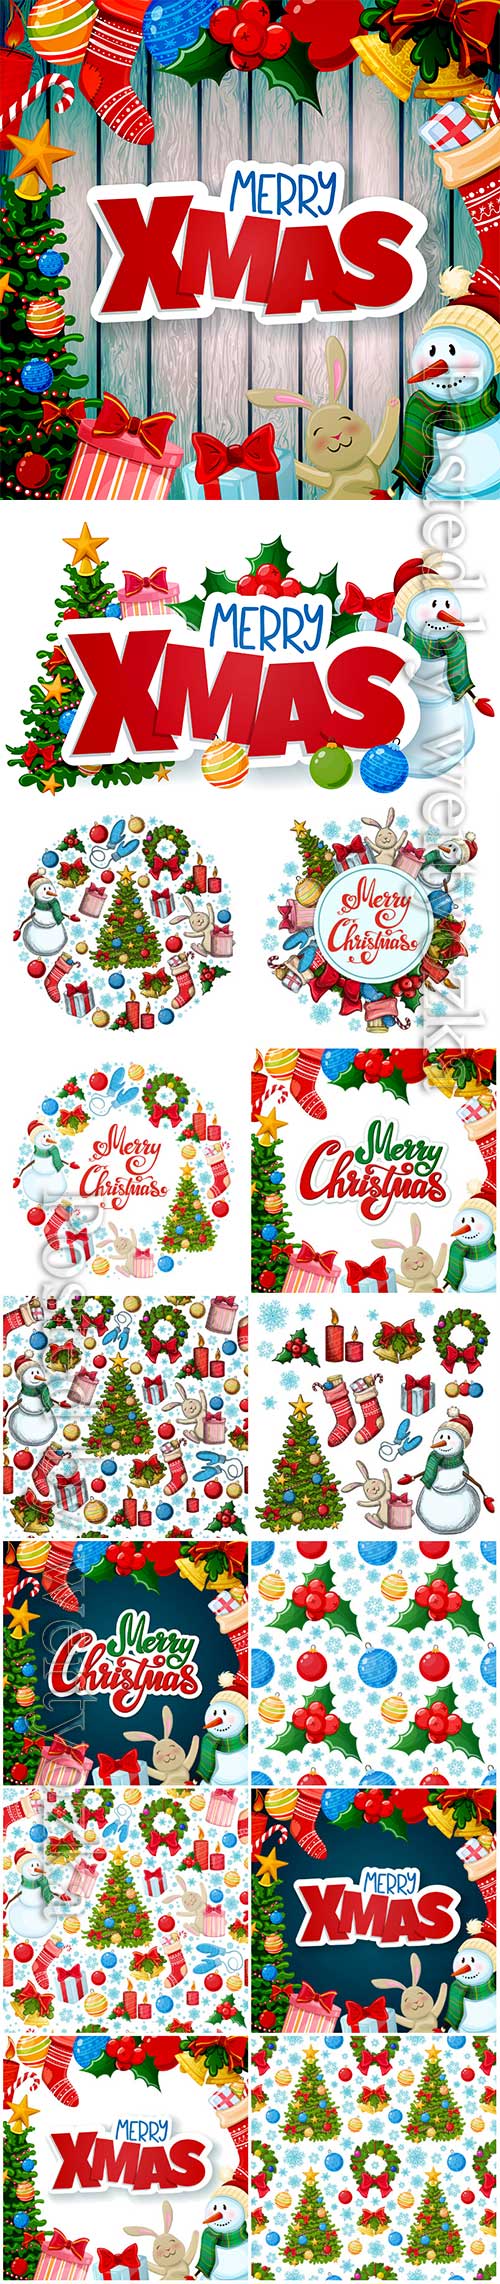 Christmas greeting card, merry xmas vector decorations